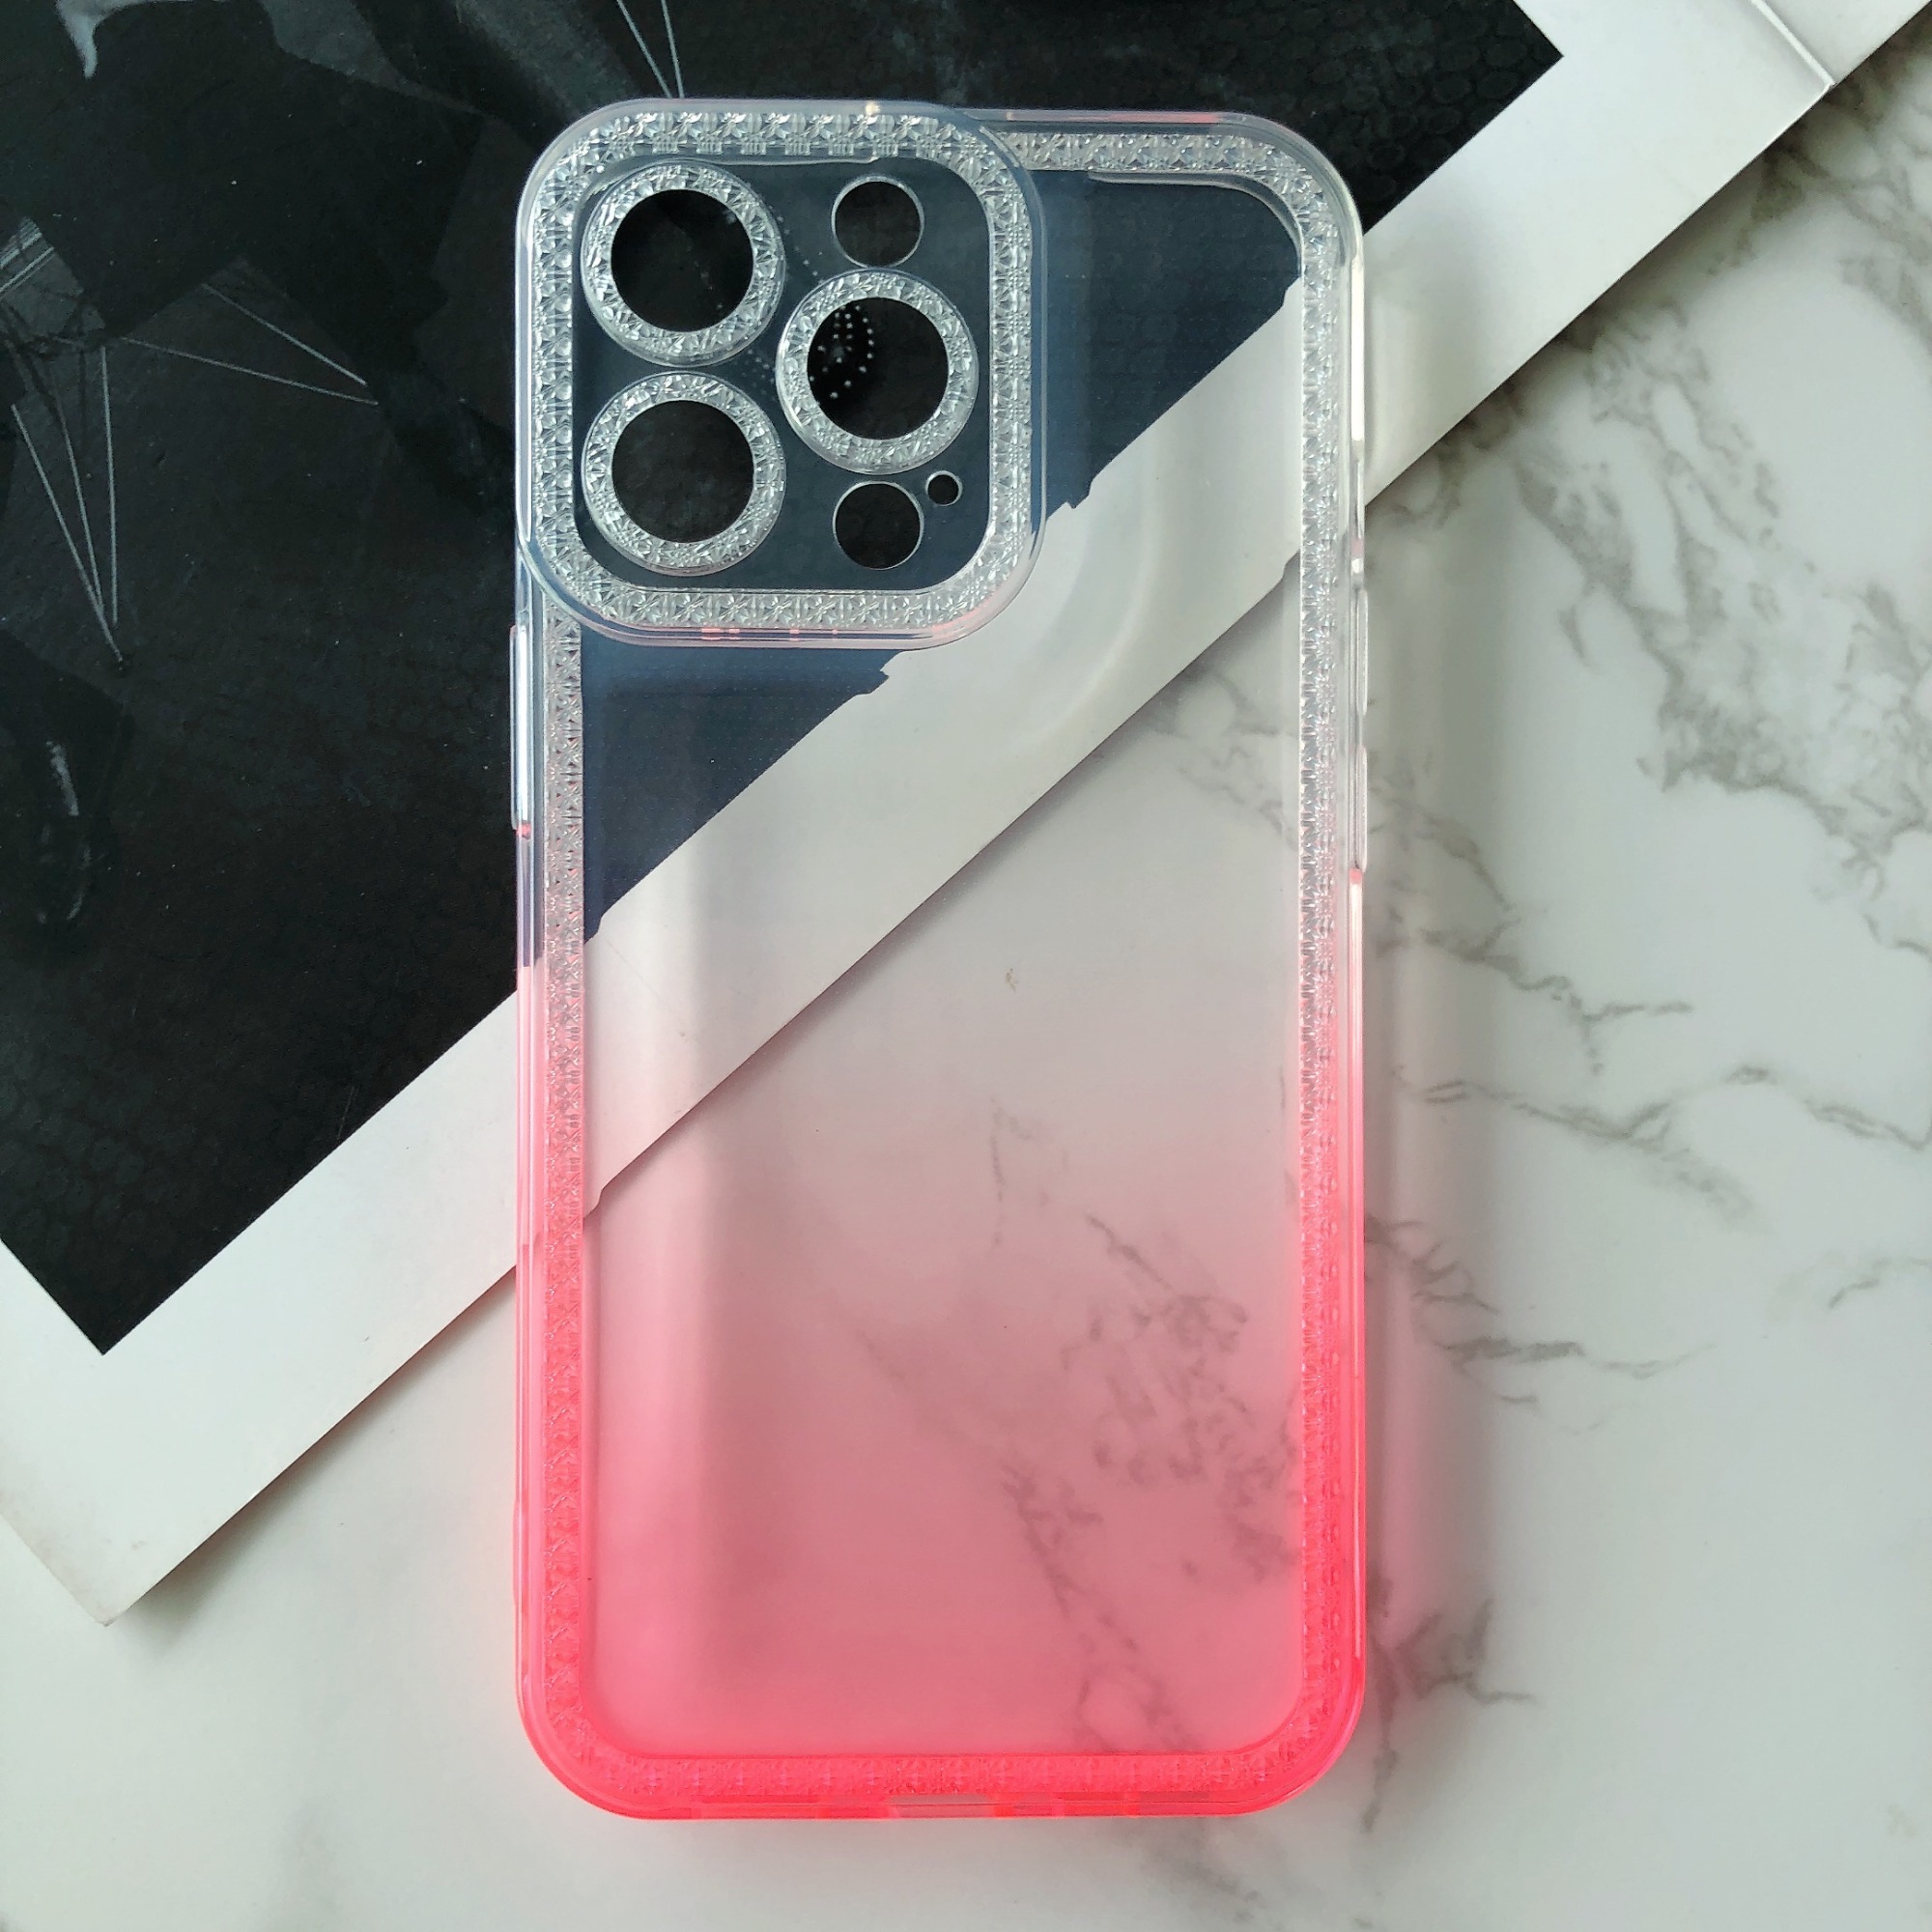 2022 new design gradient colors phone case for IPHONE XS XR XS MAX